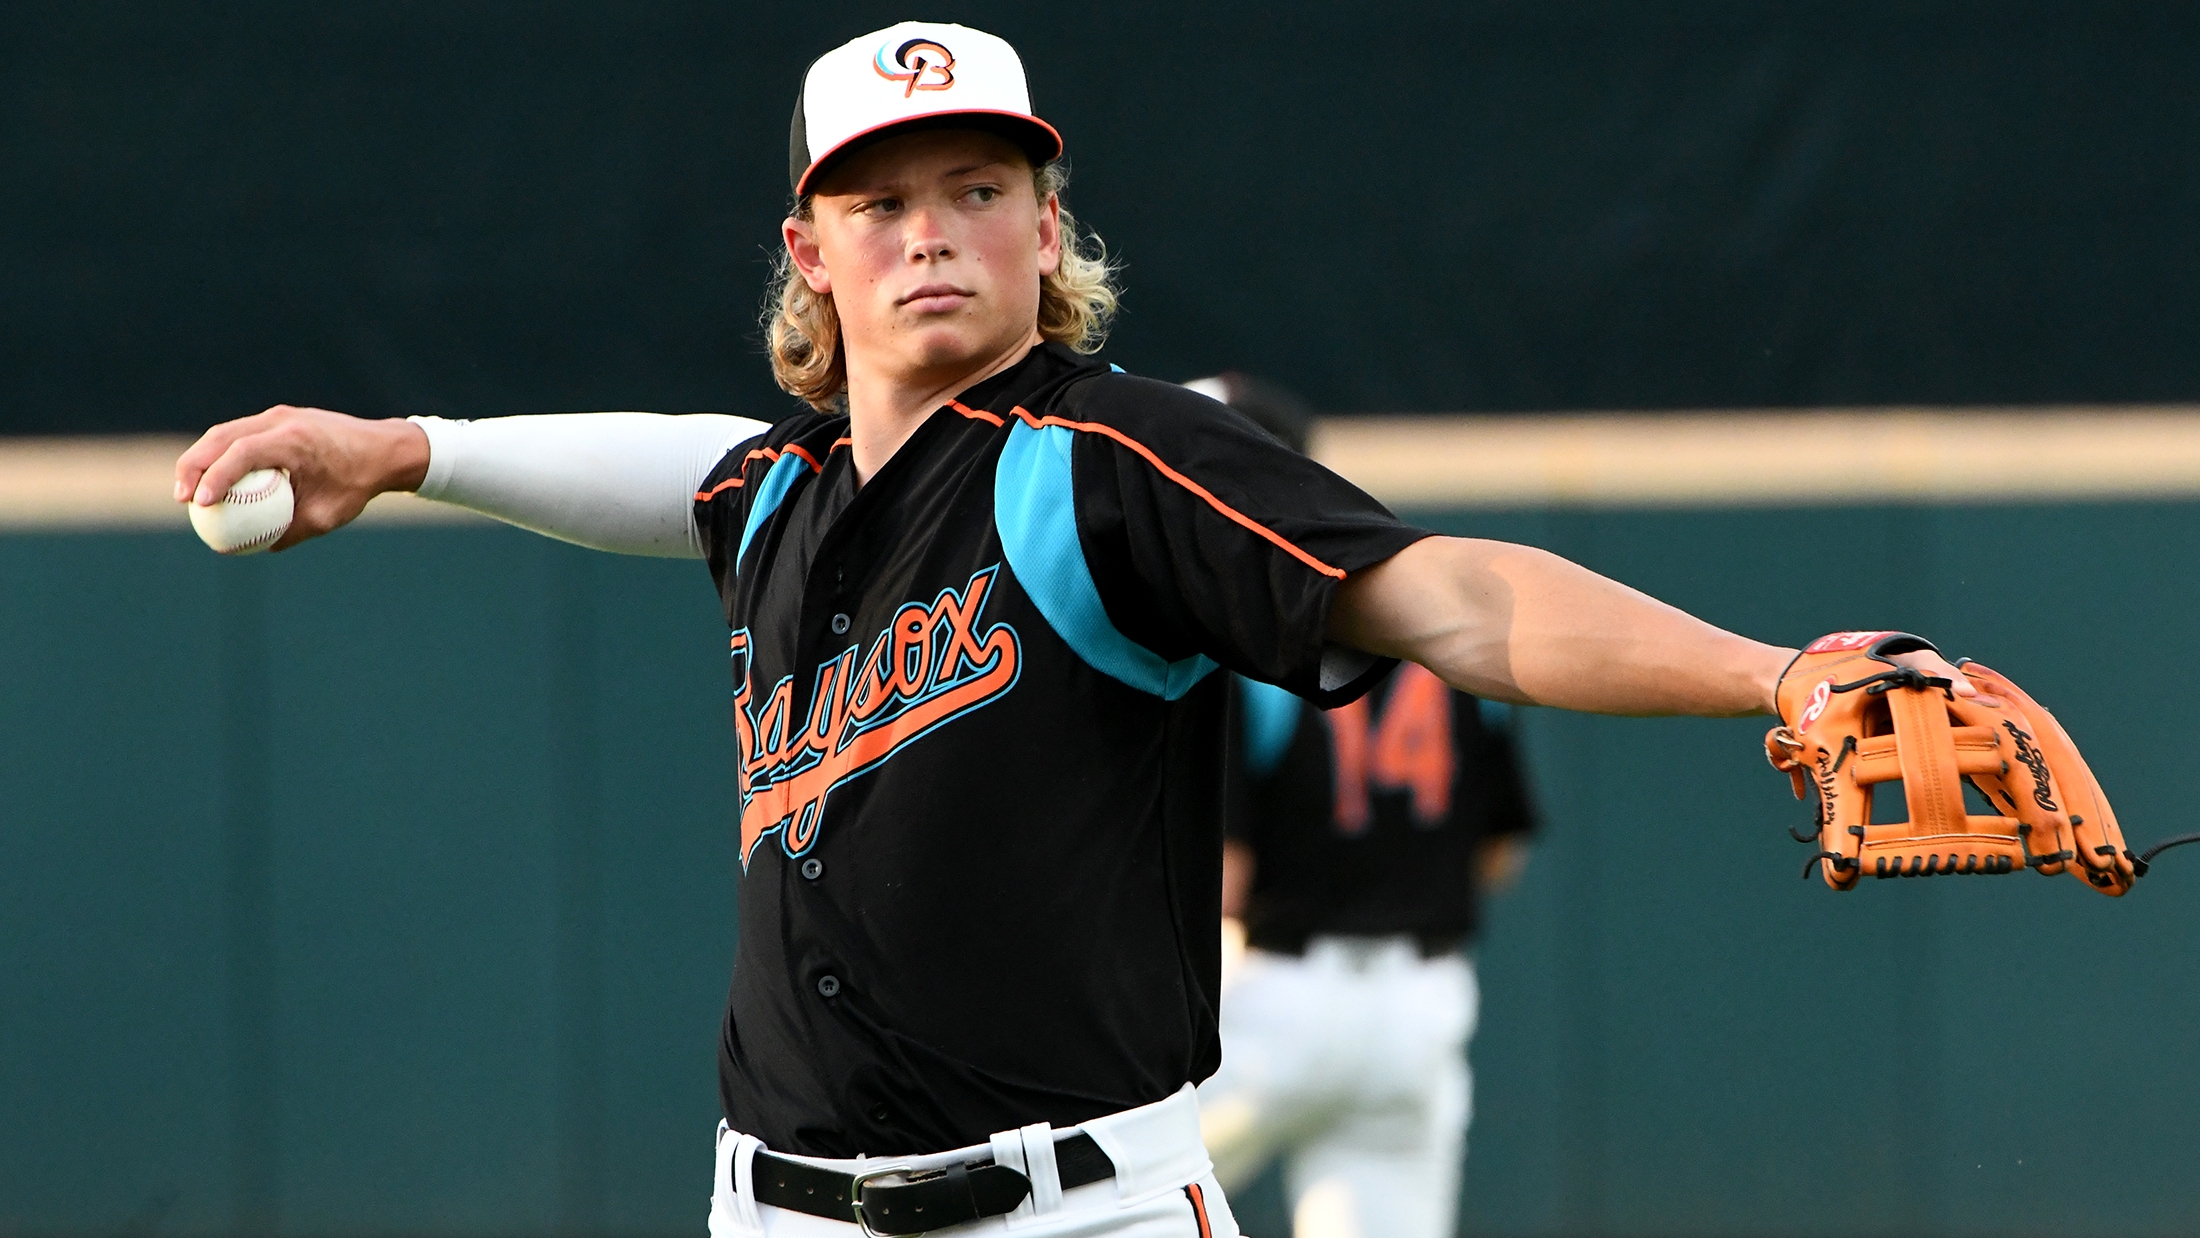 Jared Beck, 7-foot tall lefty pitcher, drafted by Orioles